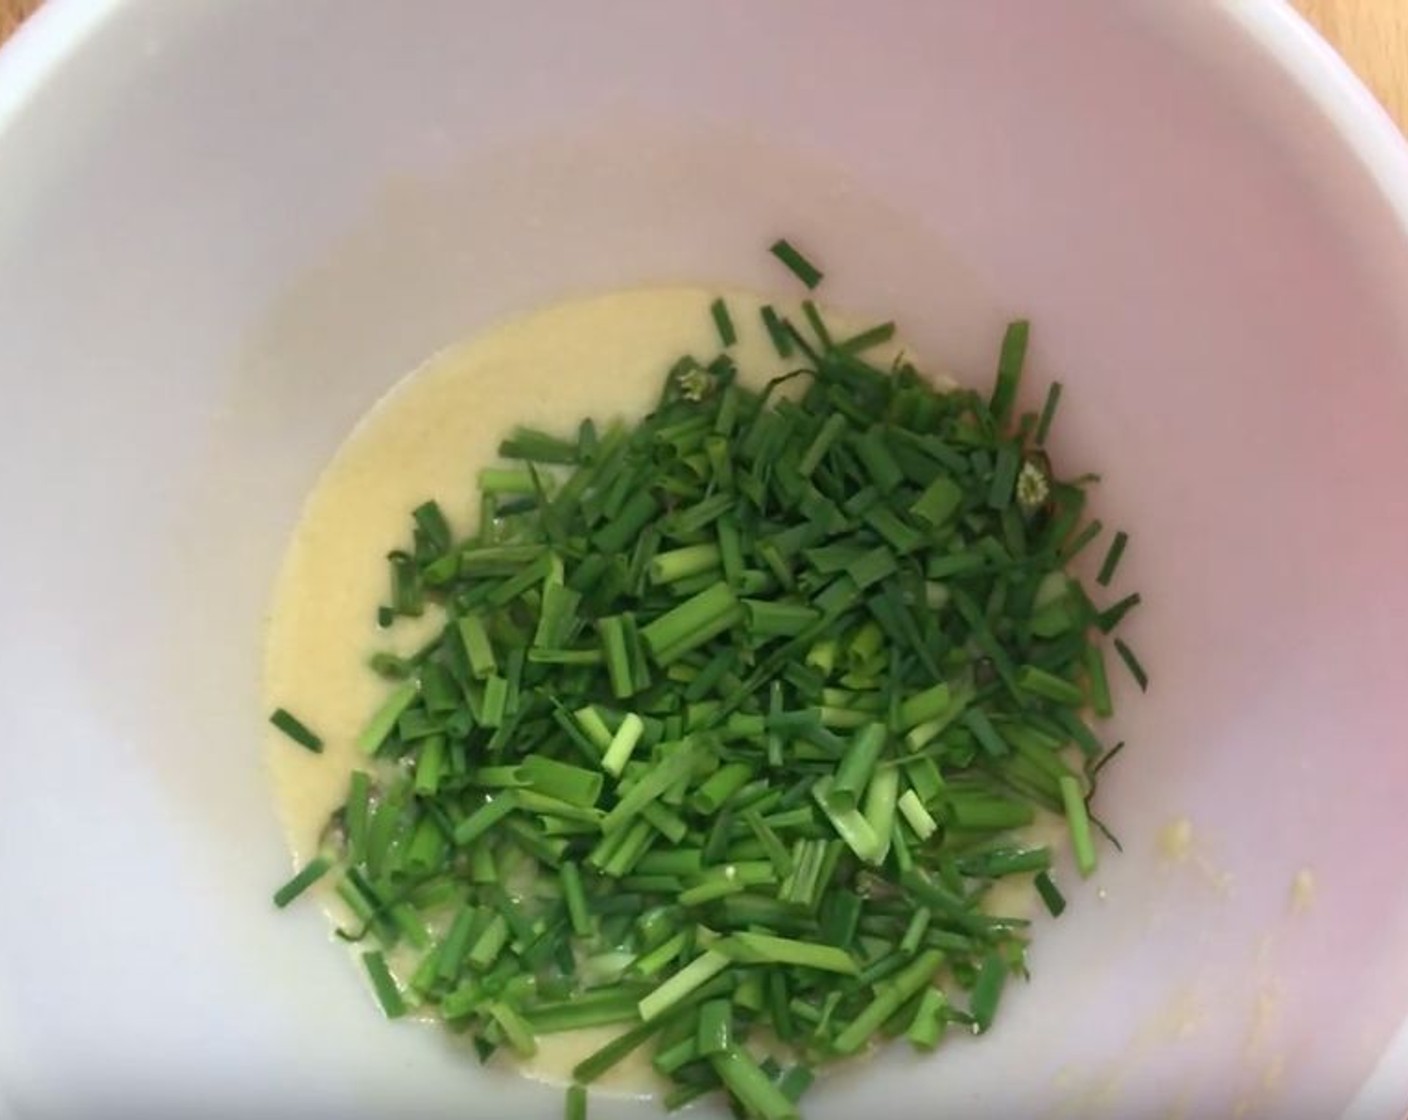 step 3 Whisk together the juice from the Lemon (1), Dijon Mustard (1 Tbsp), Extra-Virgin Olive Oil (2 Tbsp), and Maple Syrup (1 tsp) until it has emulsified, then stir in the Fresh Chives (1/4 cup). Toss the veggies with the dressing using your clean hands.